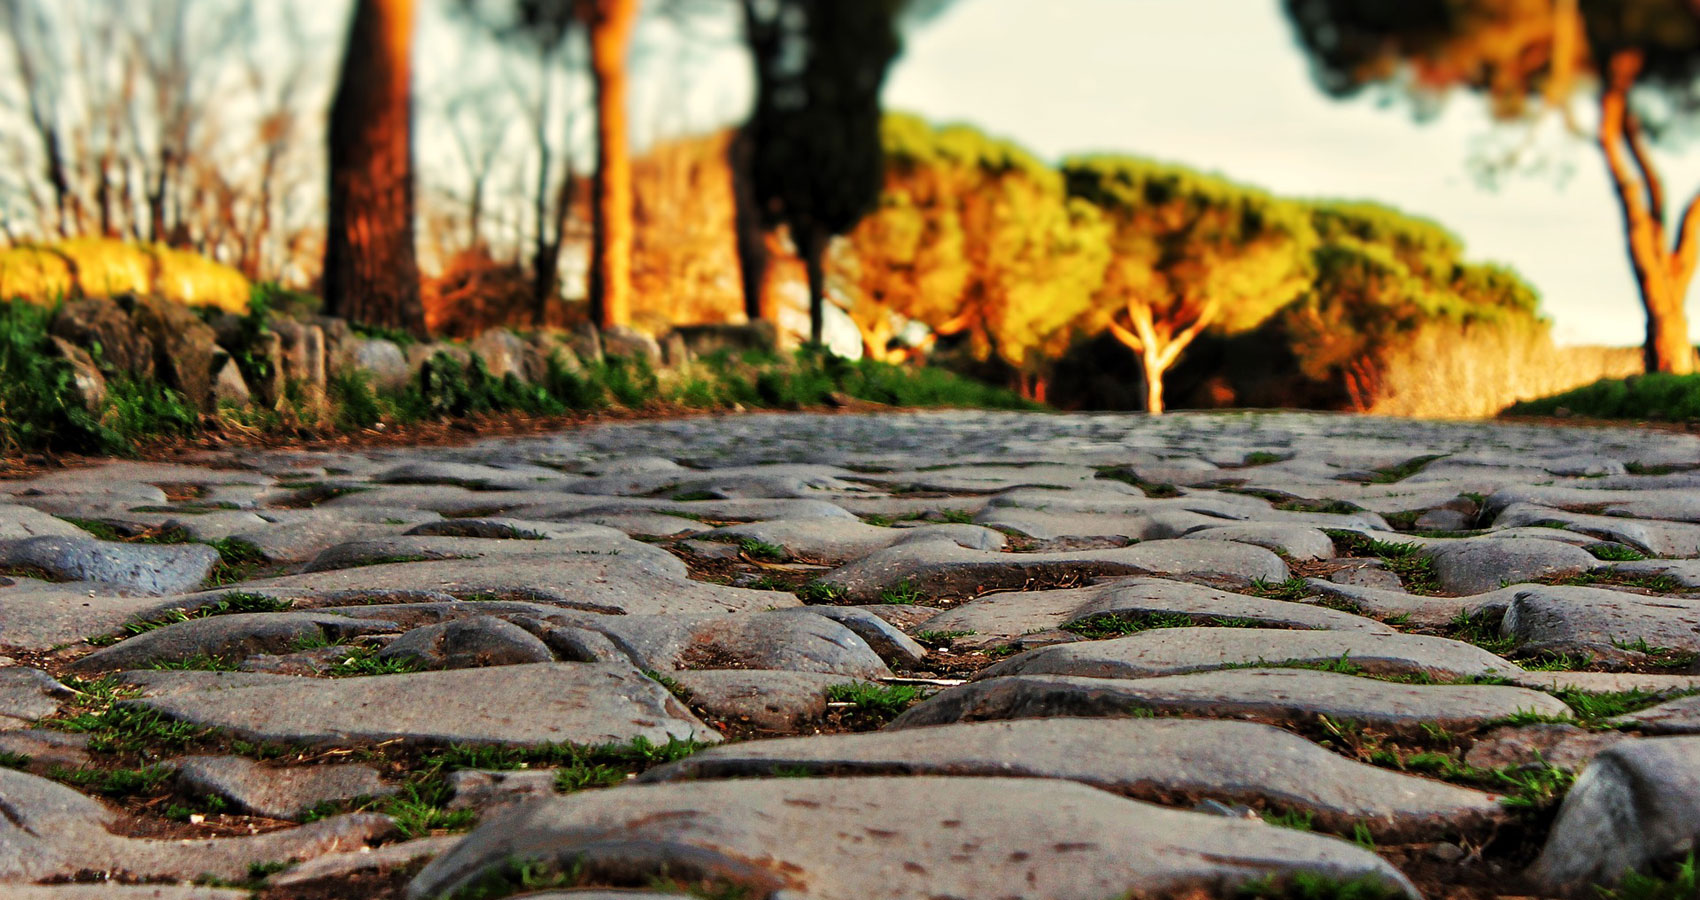 All Roads Lead To Rome, a poem written by lulia Halatz at Spillwords.com